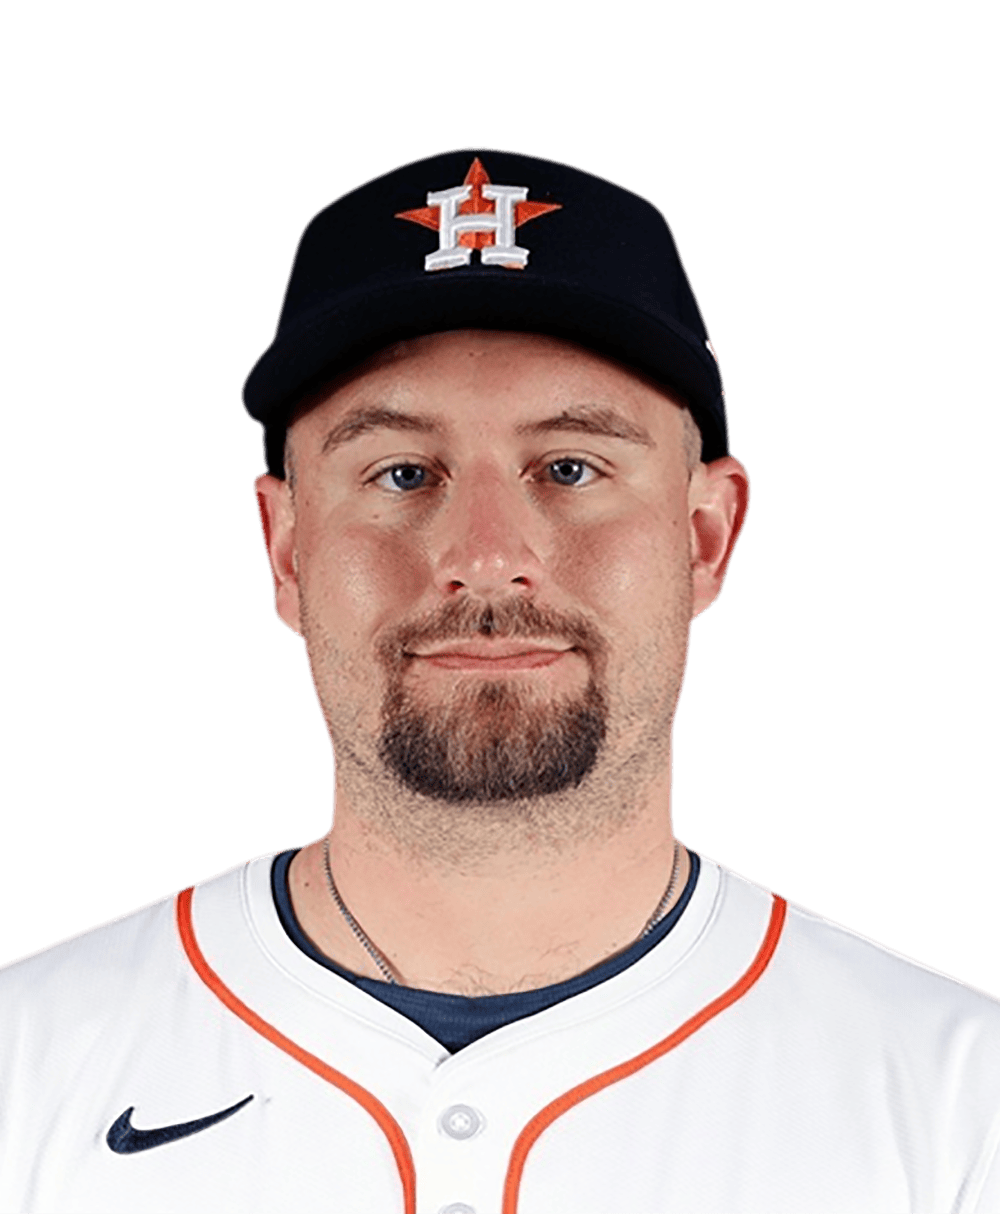 Ryne Stanek - MLB Relief pitcher - News, Stats, Bio and more - The